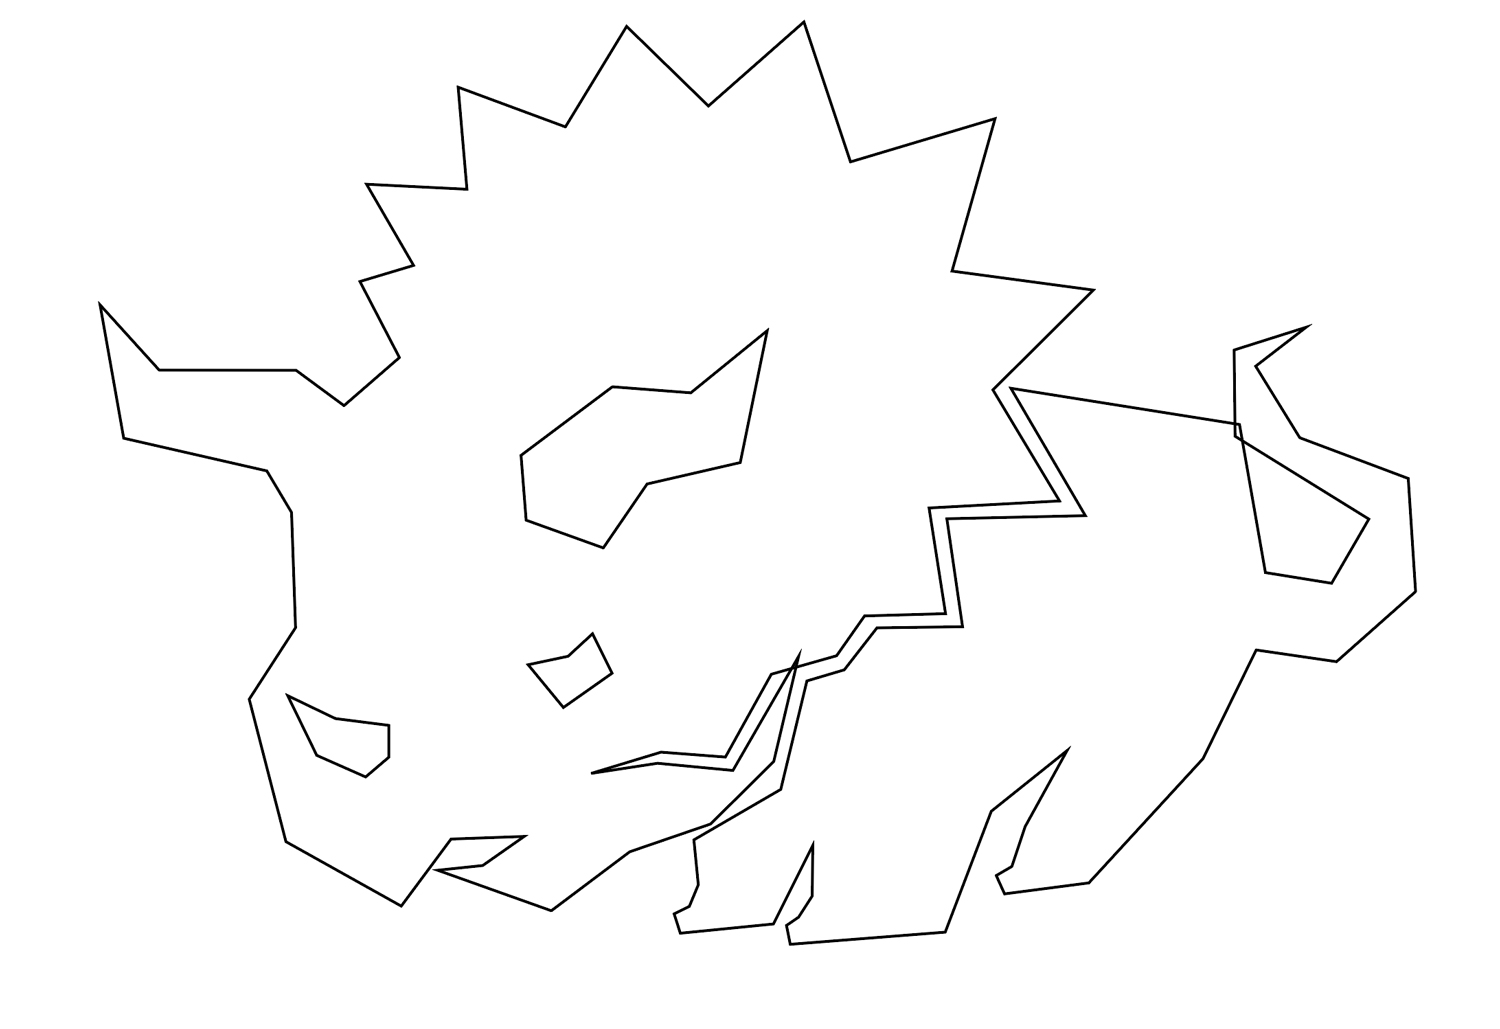 A triceratops drawn with spiky edges inside Adobe Illustrator